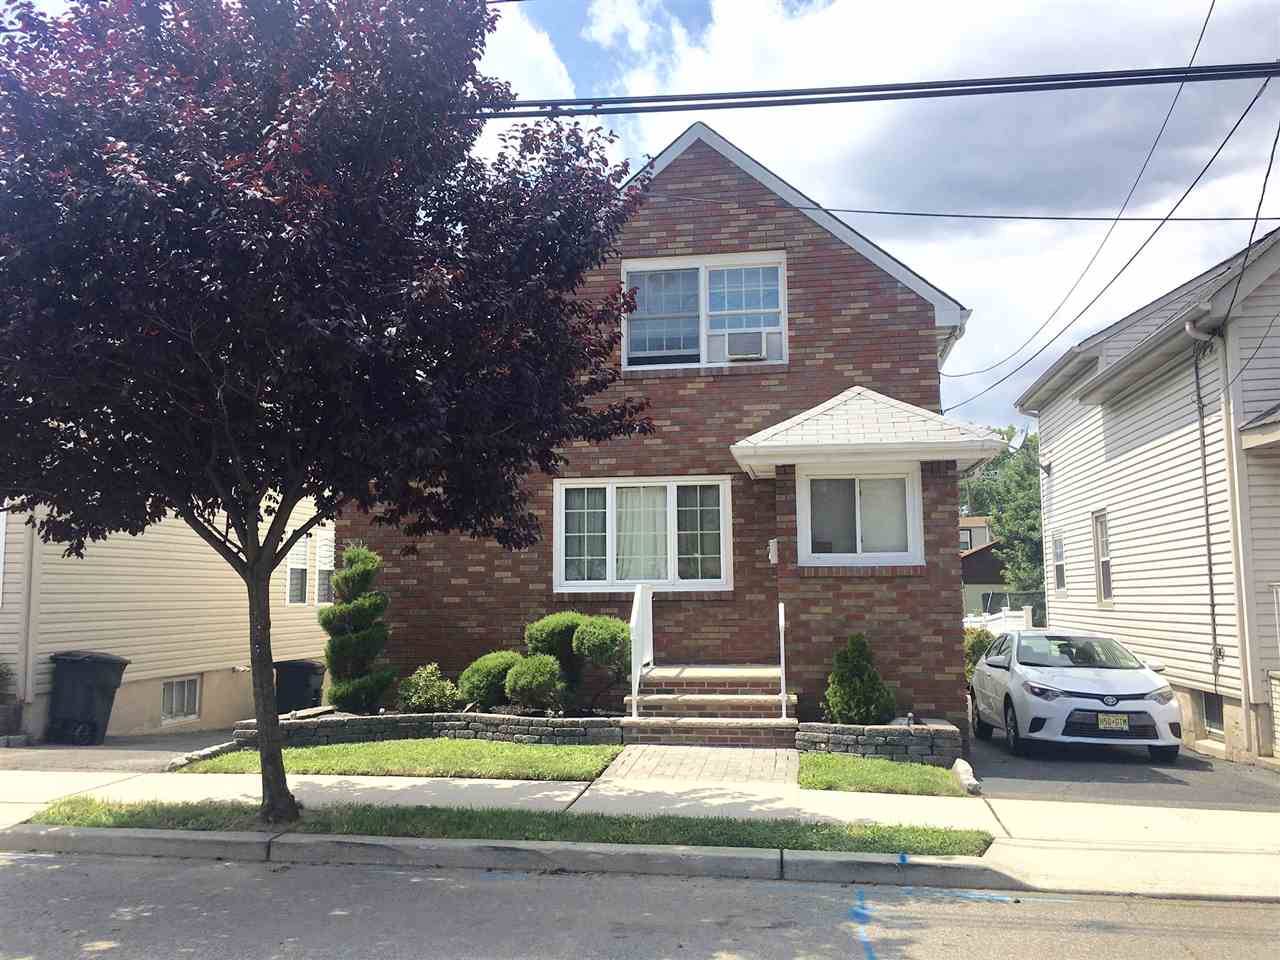 Nicely kept - 3 BR New Jersey